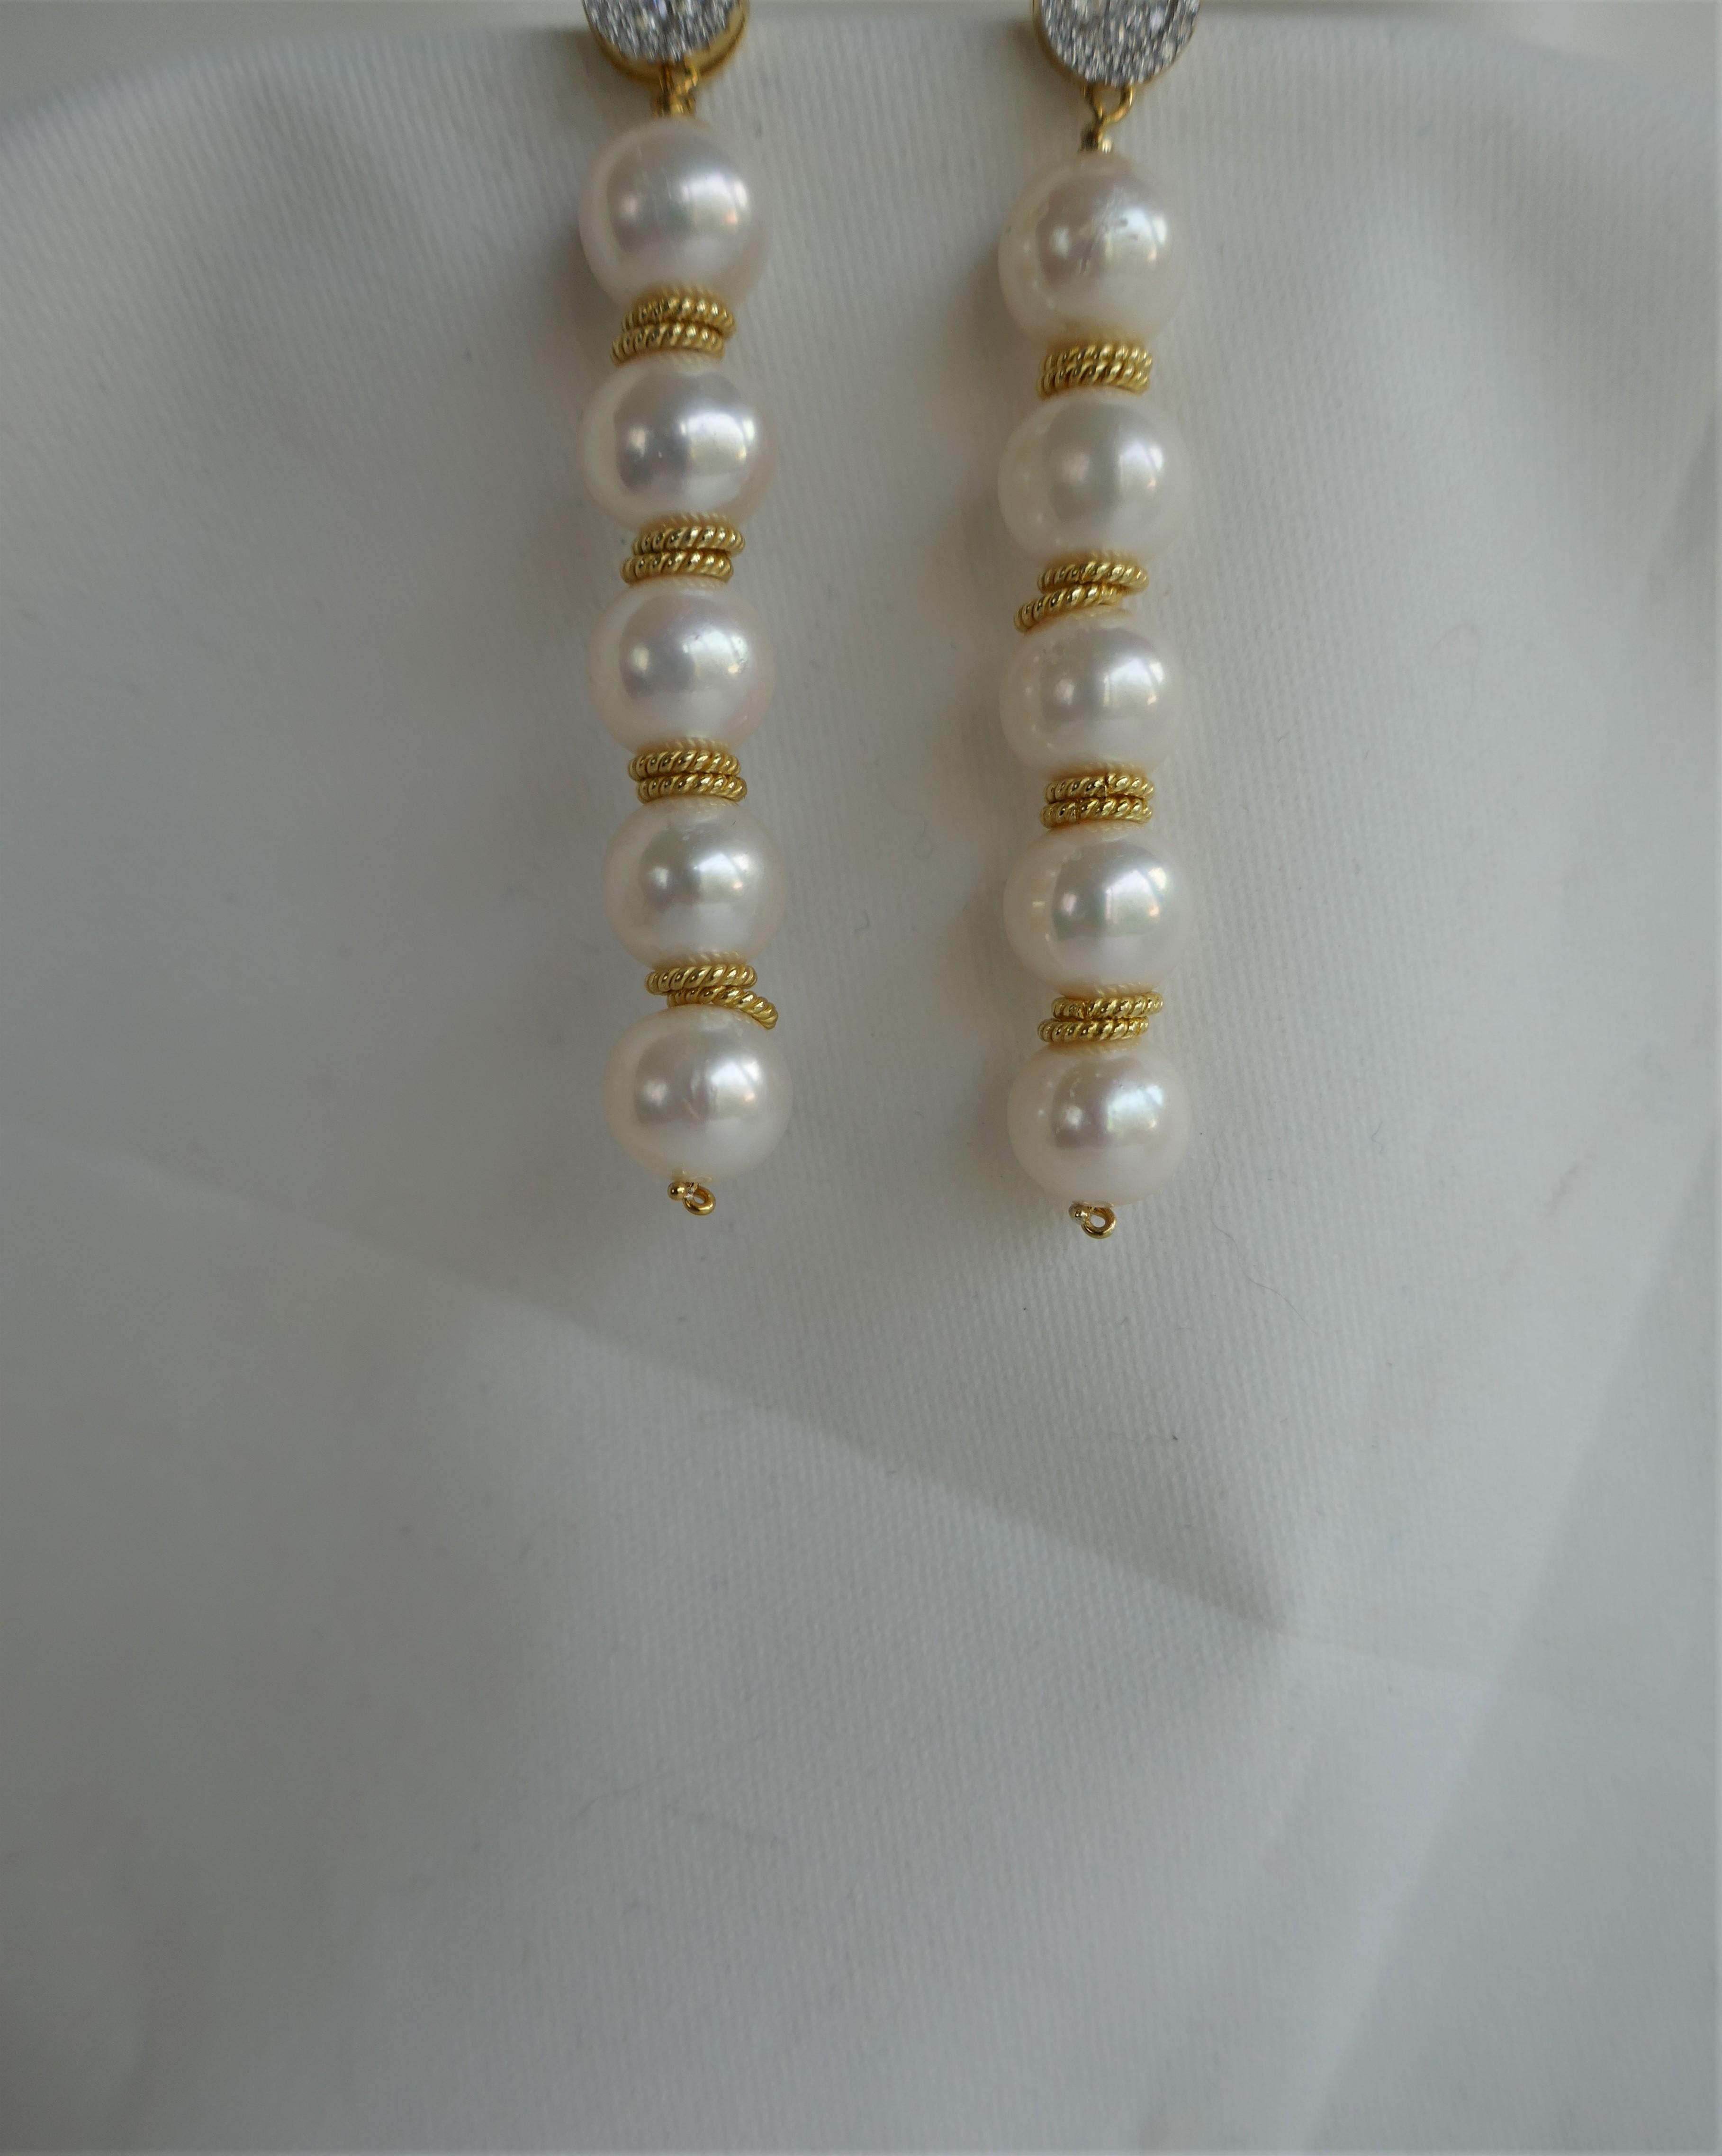 These earrings are stunn1ng. The white cultured pearls are 10mm 925 sterling silver vermeil rings separates them. The hang from a 925 vermeil 8mm  cubic zirconia screw backs post. A rubber post can be used replace the screw back. The earrings are 2